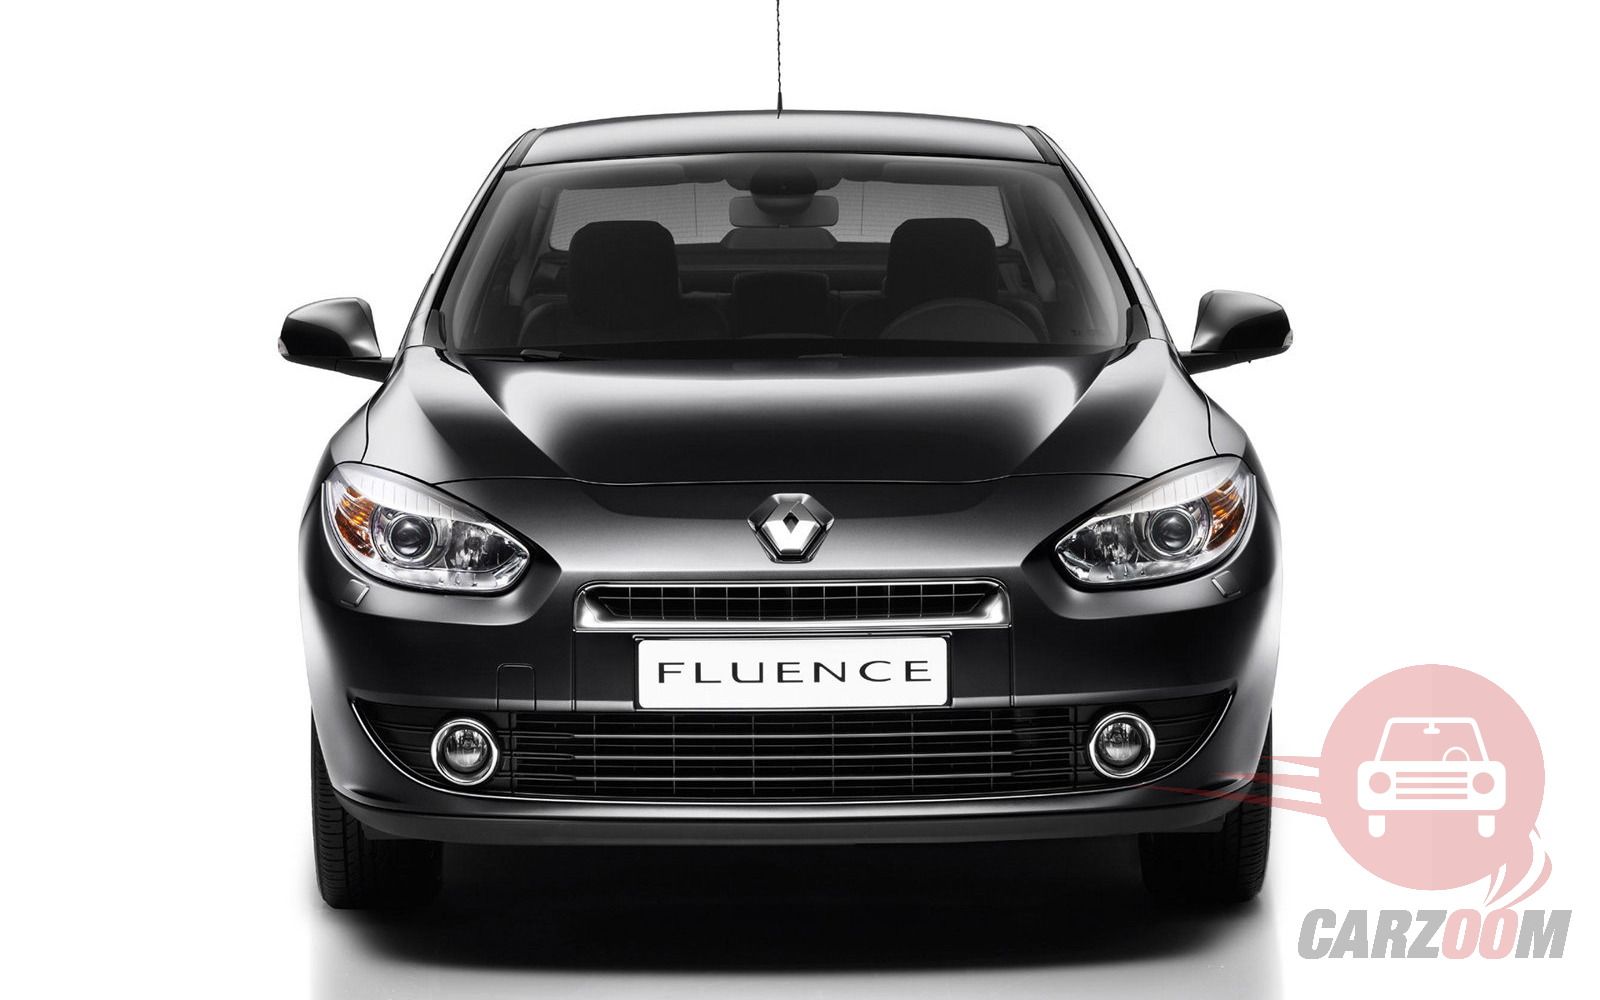 Renault Fluence Exteriors Front View